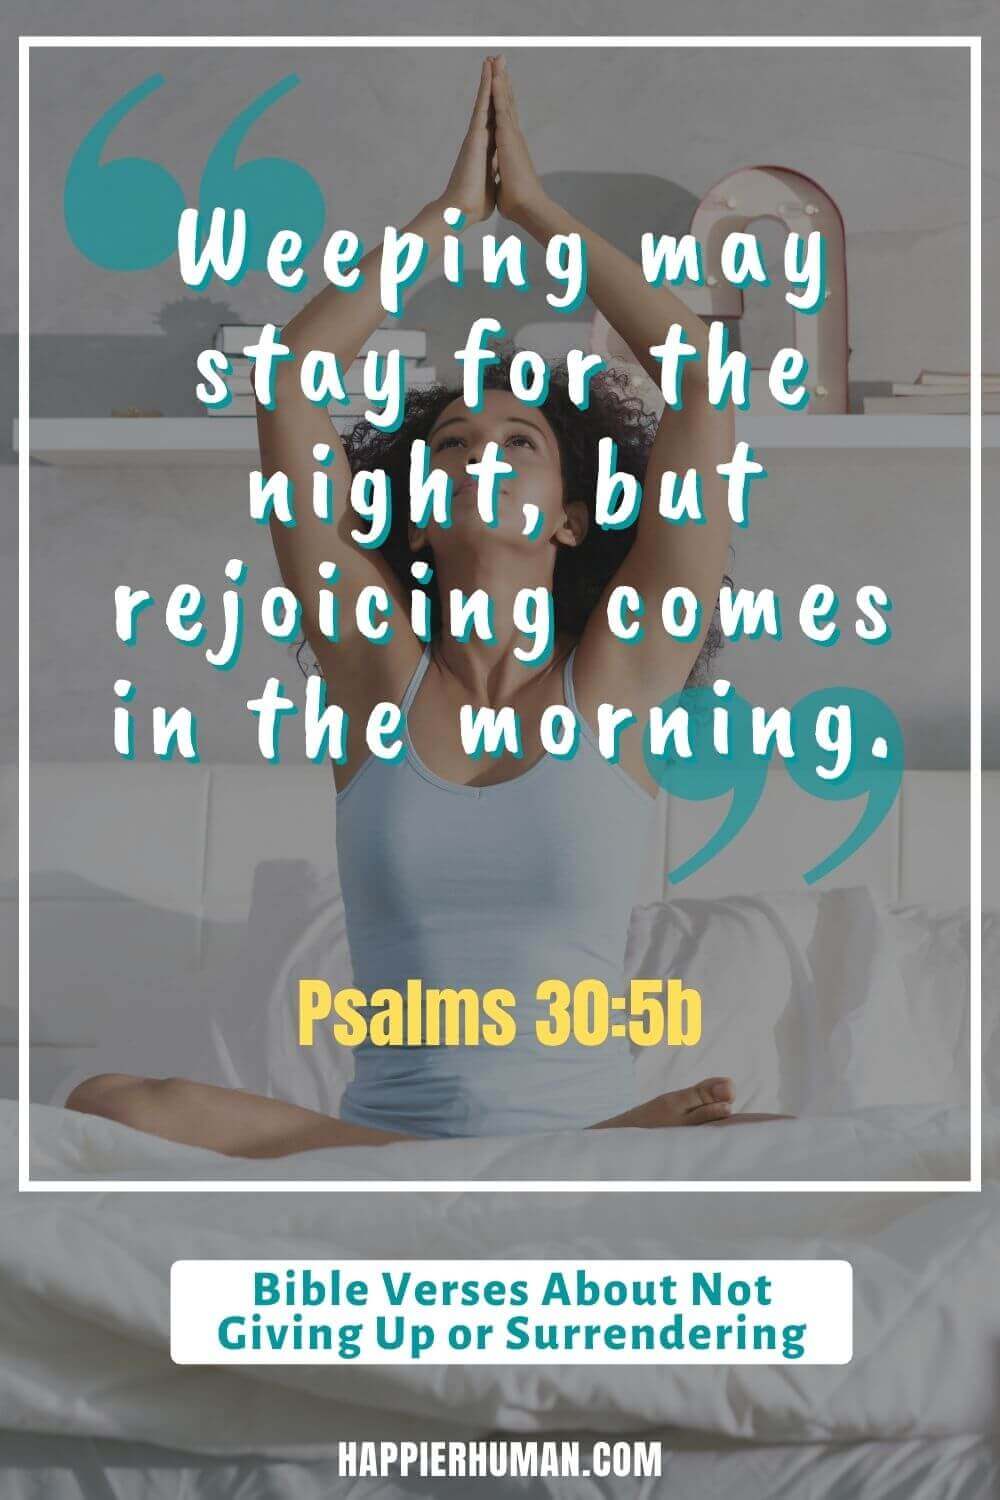 Bible Verses About Not Giving up - Psalms 30:5b says, “Weeping may stay for the night, but rejoicing comes in the morning.” | bible verses about staying strong and not giving up kjv | bible verses when you feel like giving up on life | bible verses about not giving up on marriage